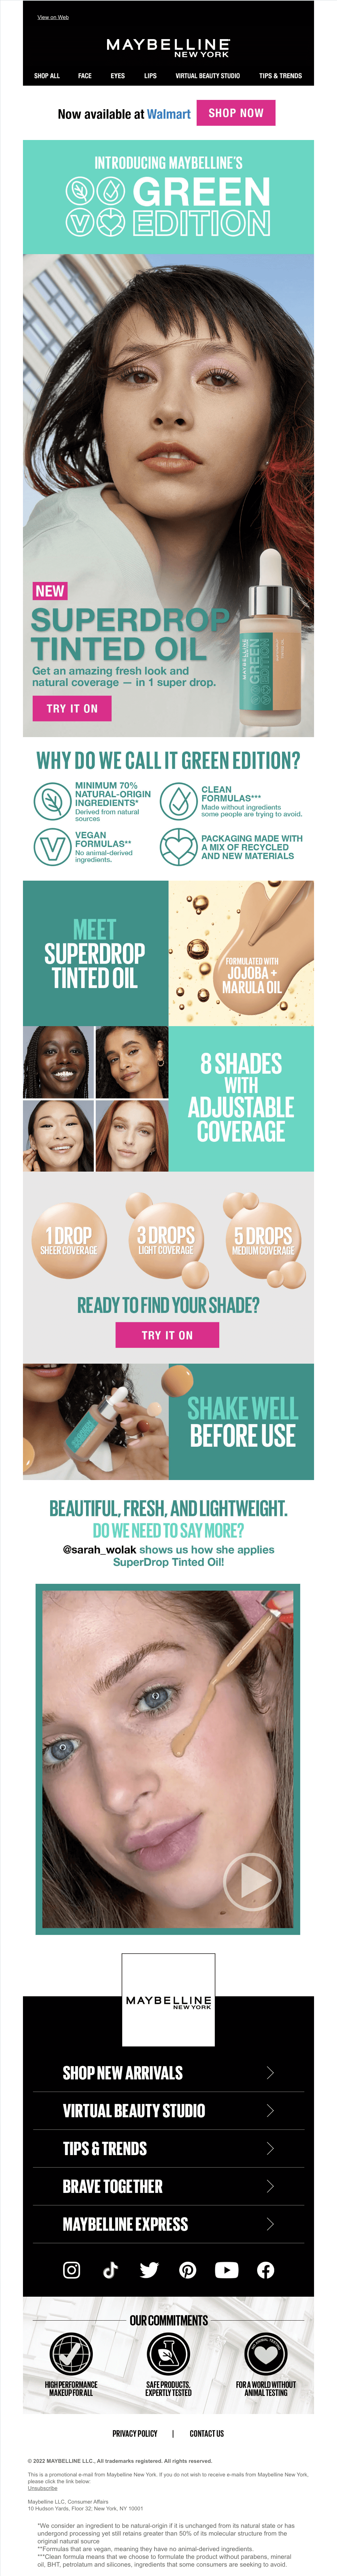 Inclusive email marketing campaign example by Maybelline